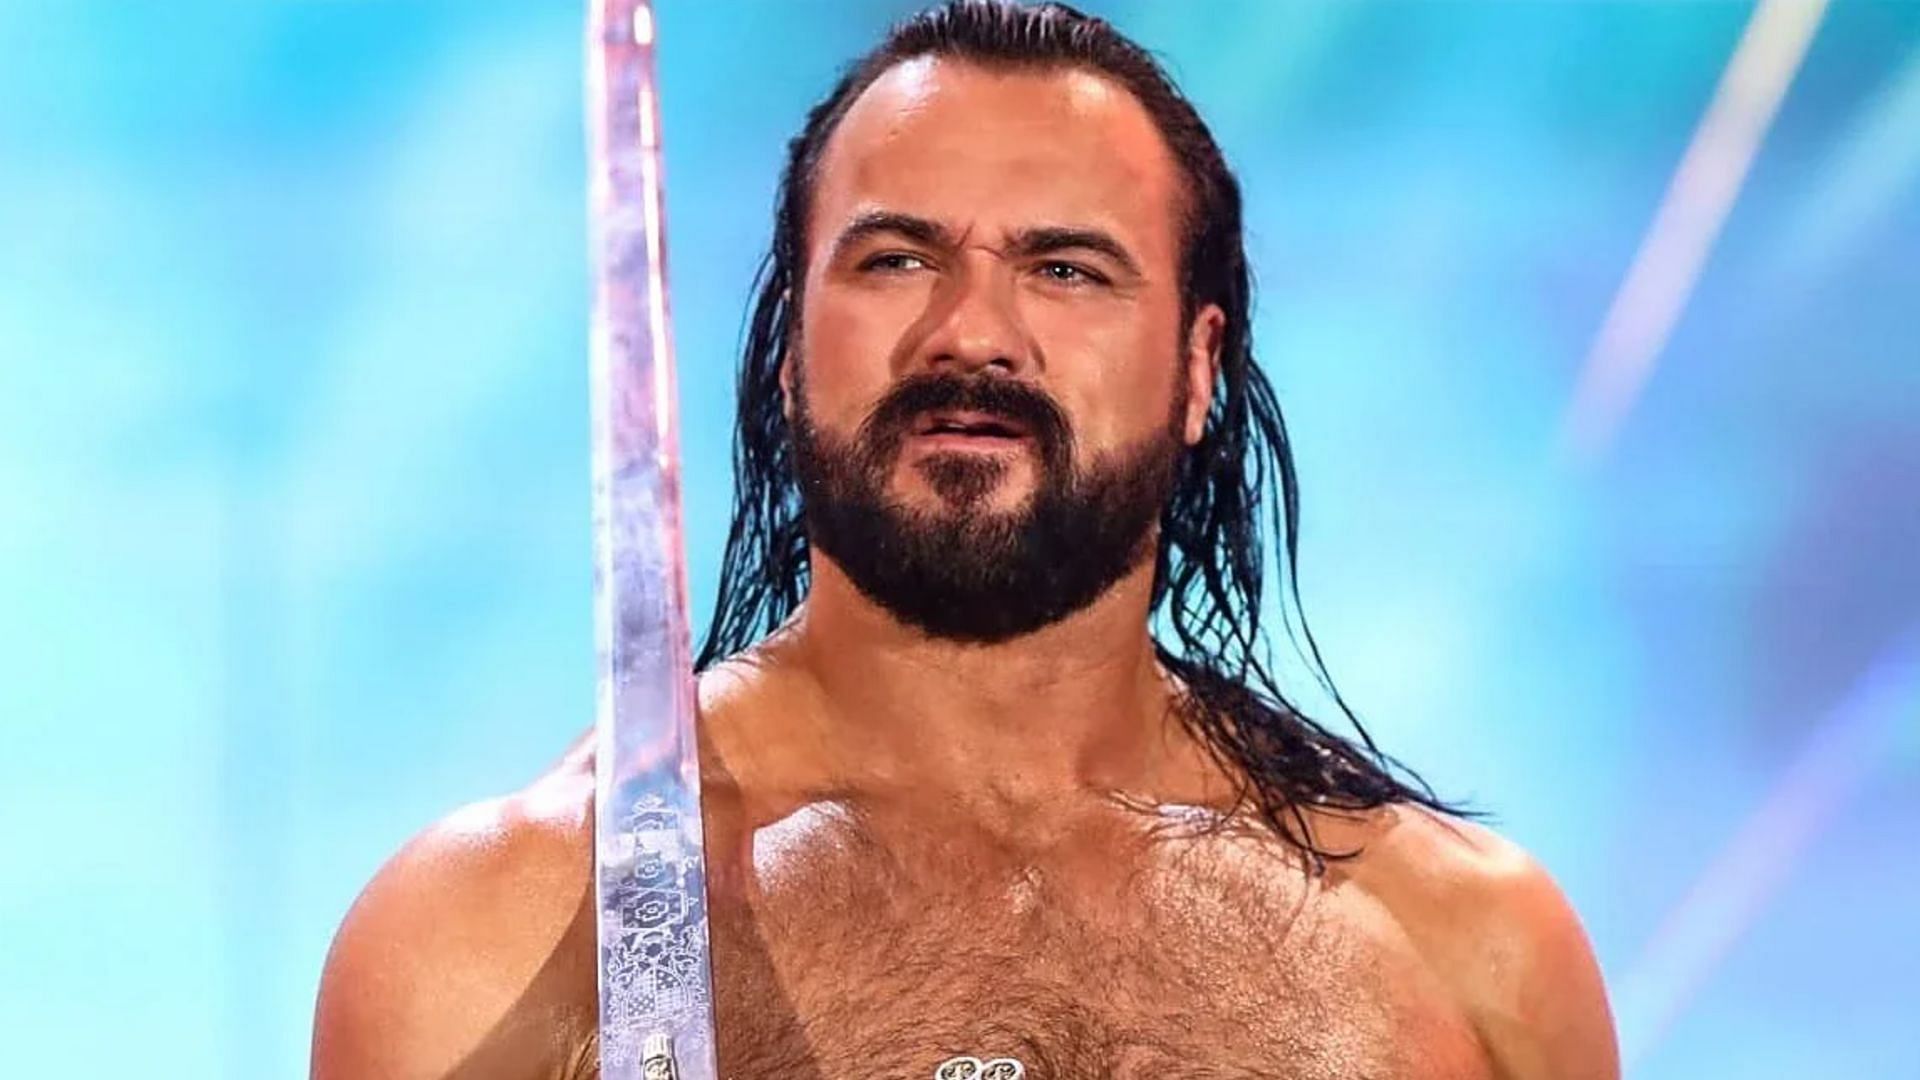 Drew McIntyre battled Roman Reigns at Clash at the Castle